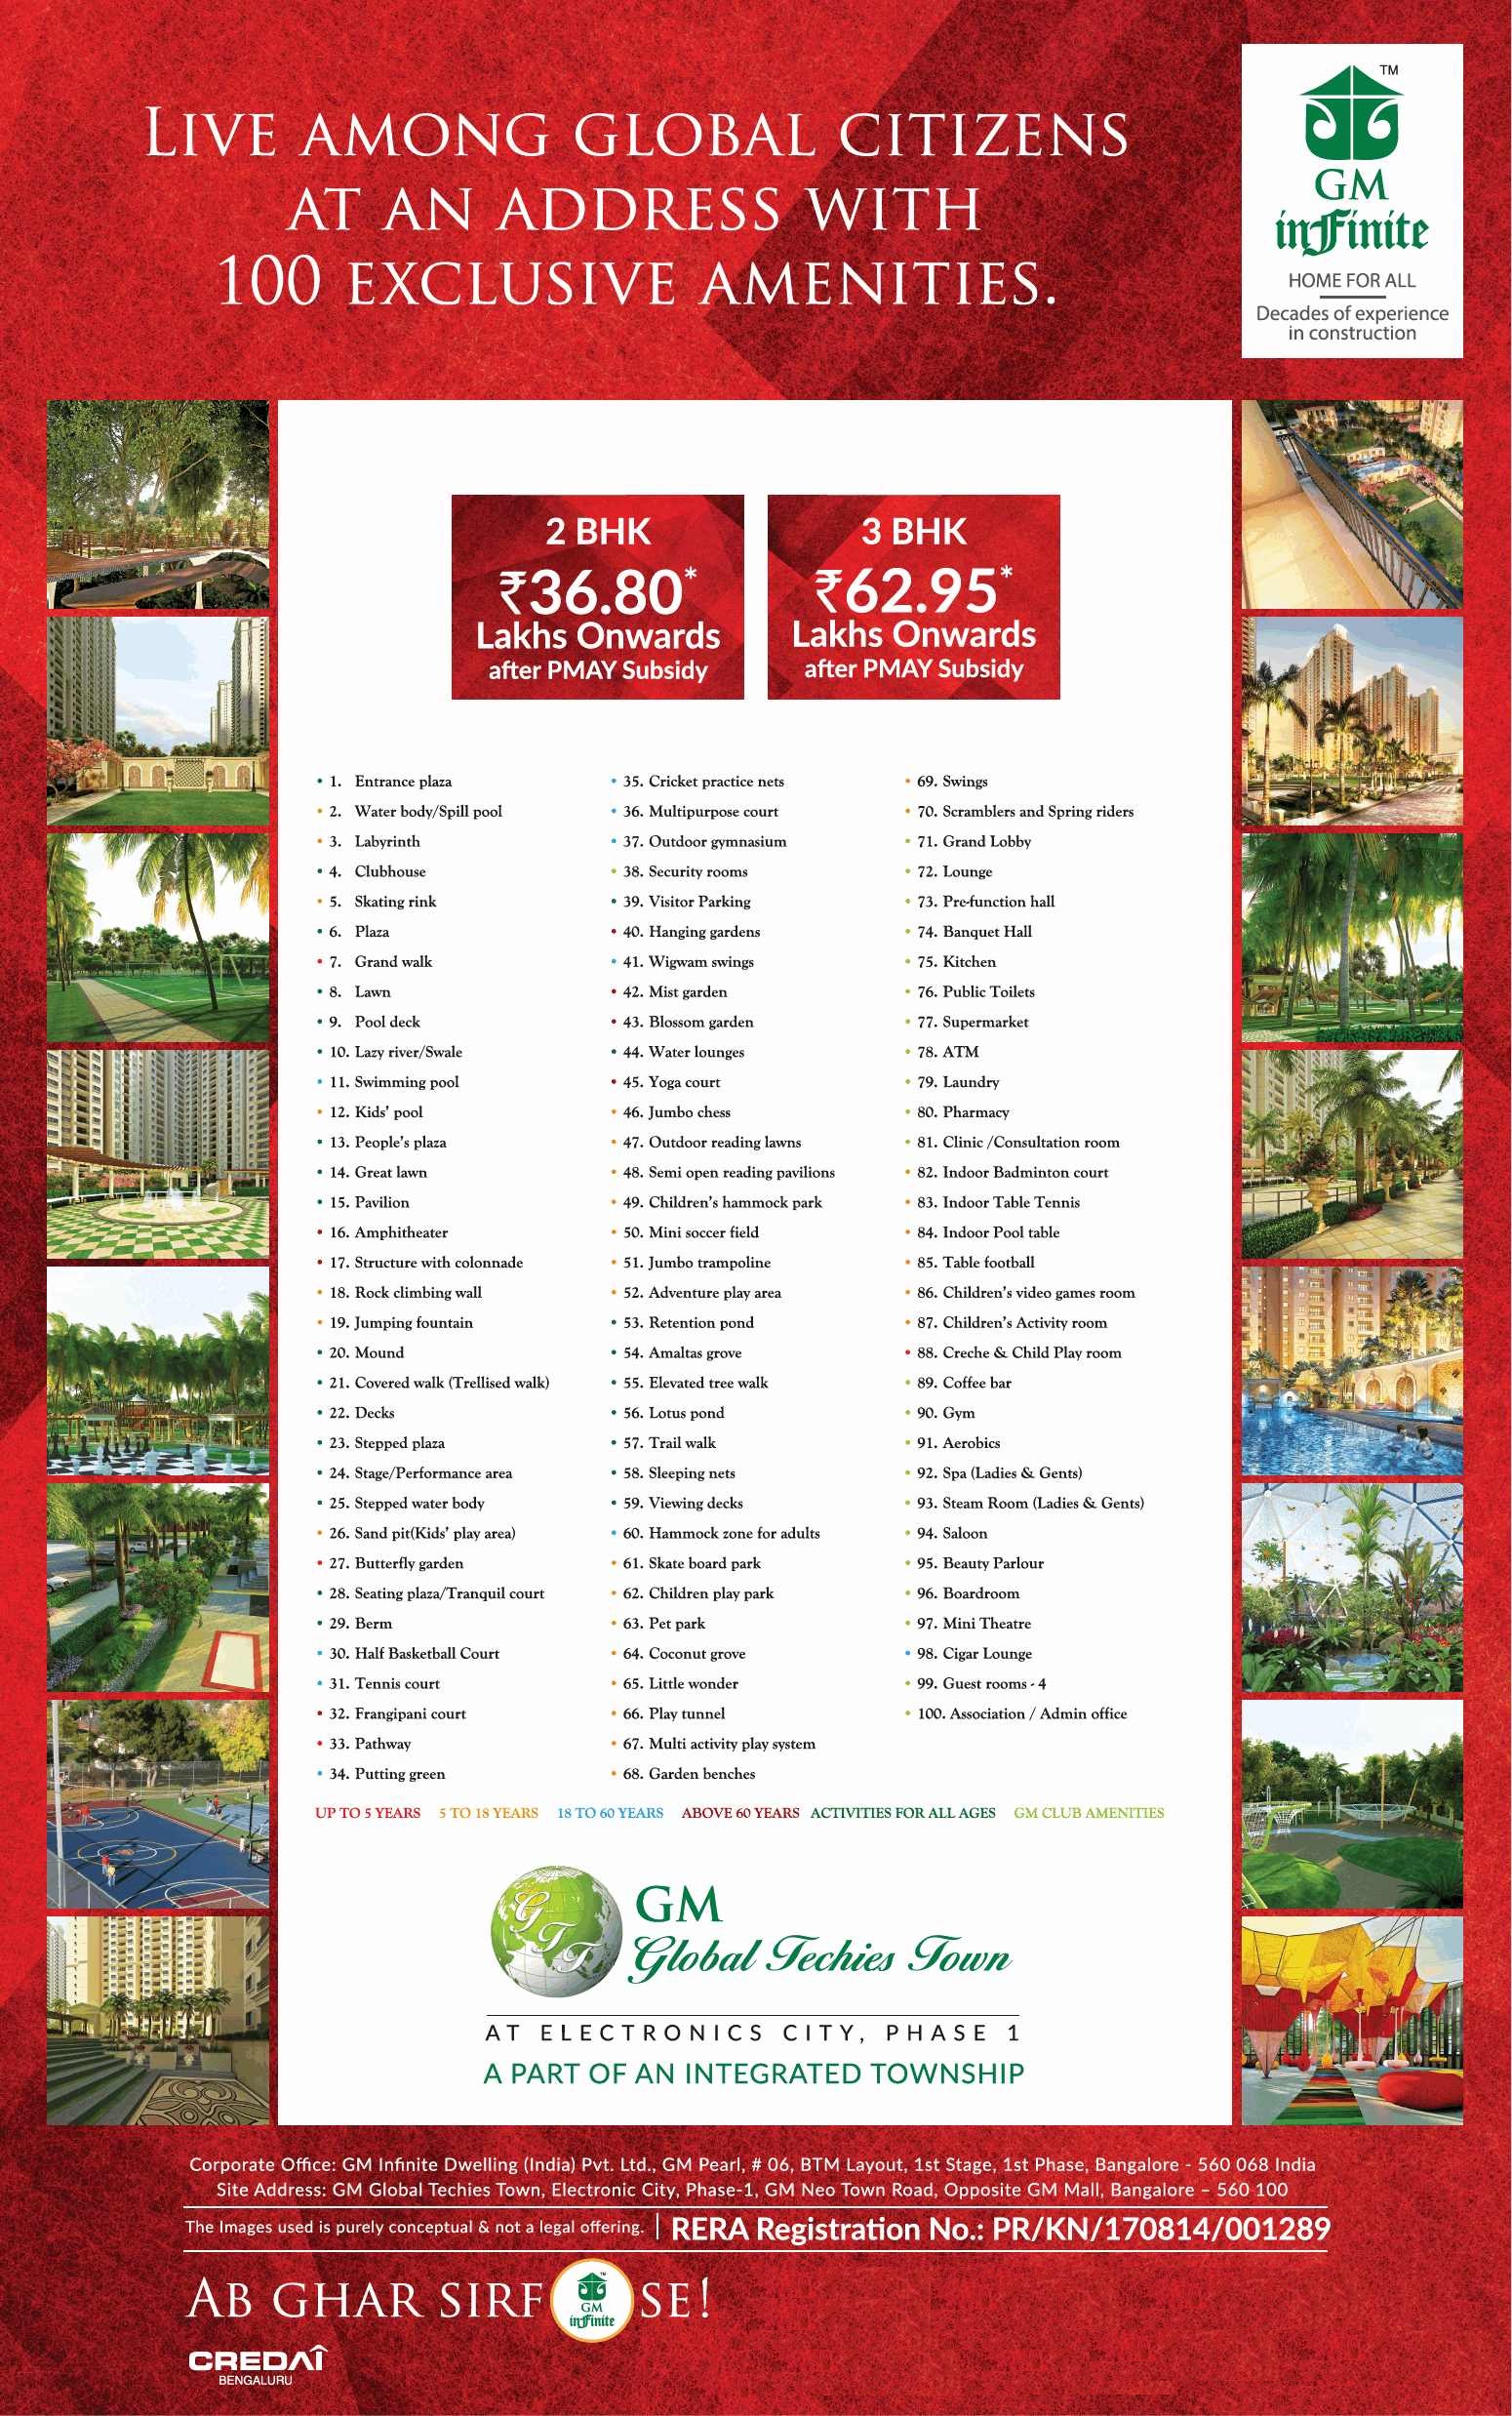 GM Global Techies Town launching apartments with 100 exclusive amenities in Bangalore Update